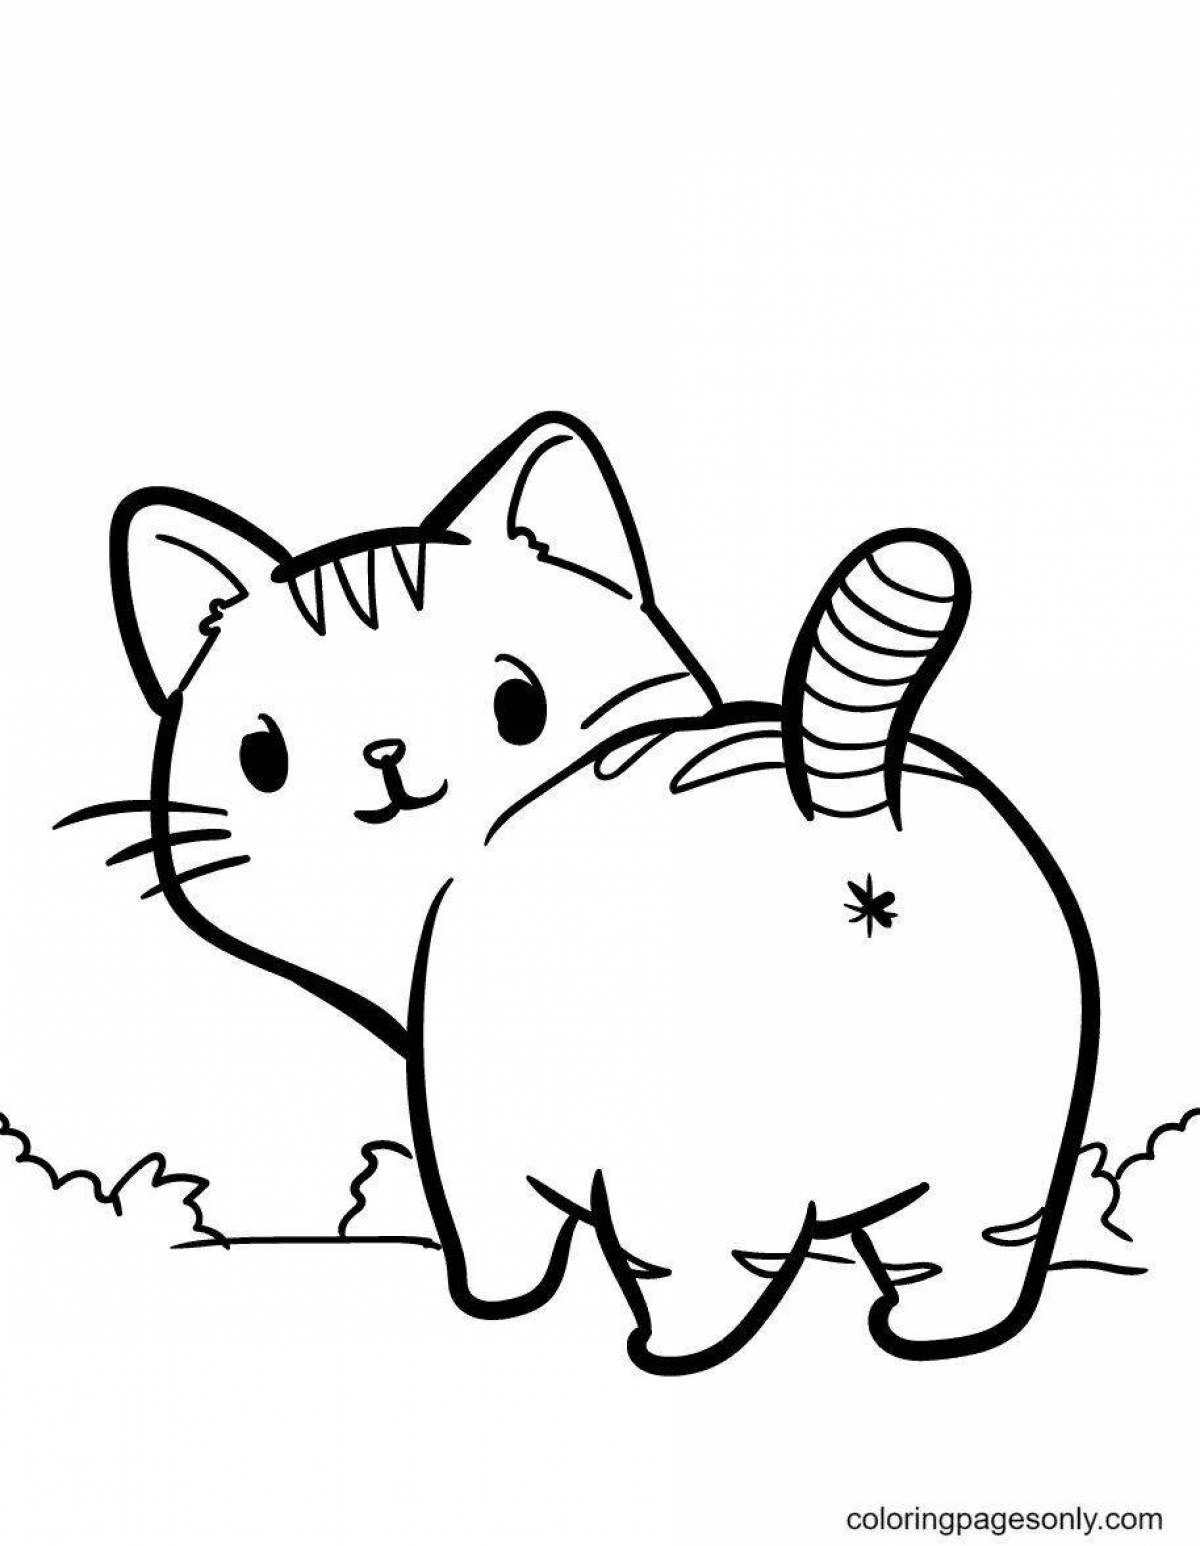 Curious square cat coloring page